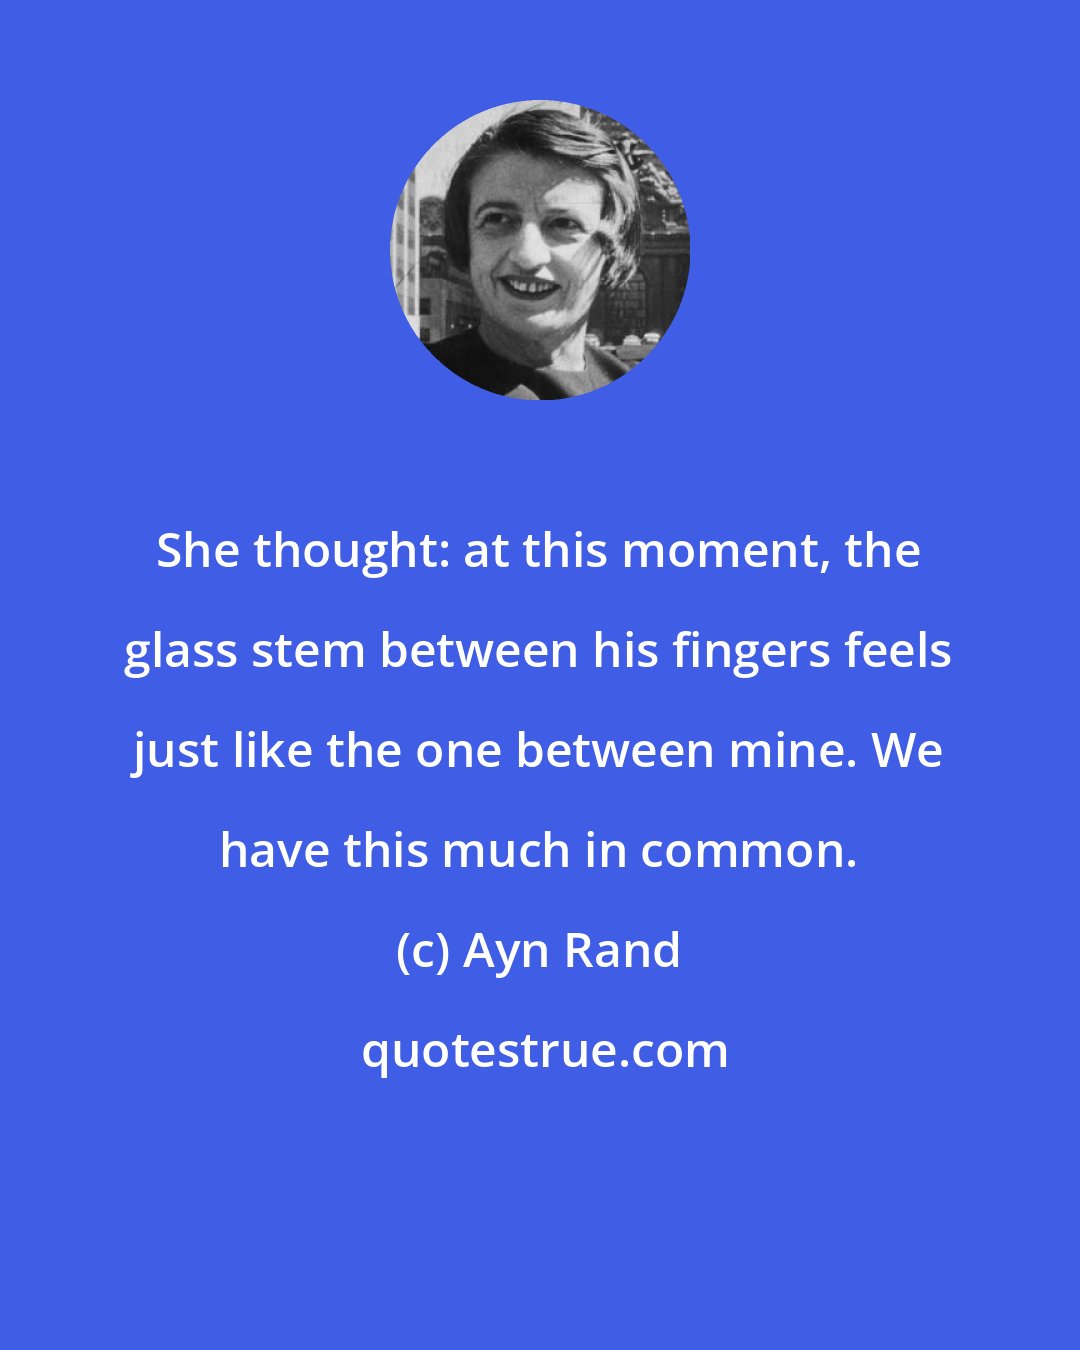 Ayn Rand: She thought: at this moment, the glass stem between his fingers feels just like the one between mine. We have this much in common.